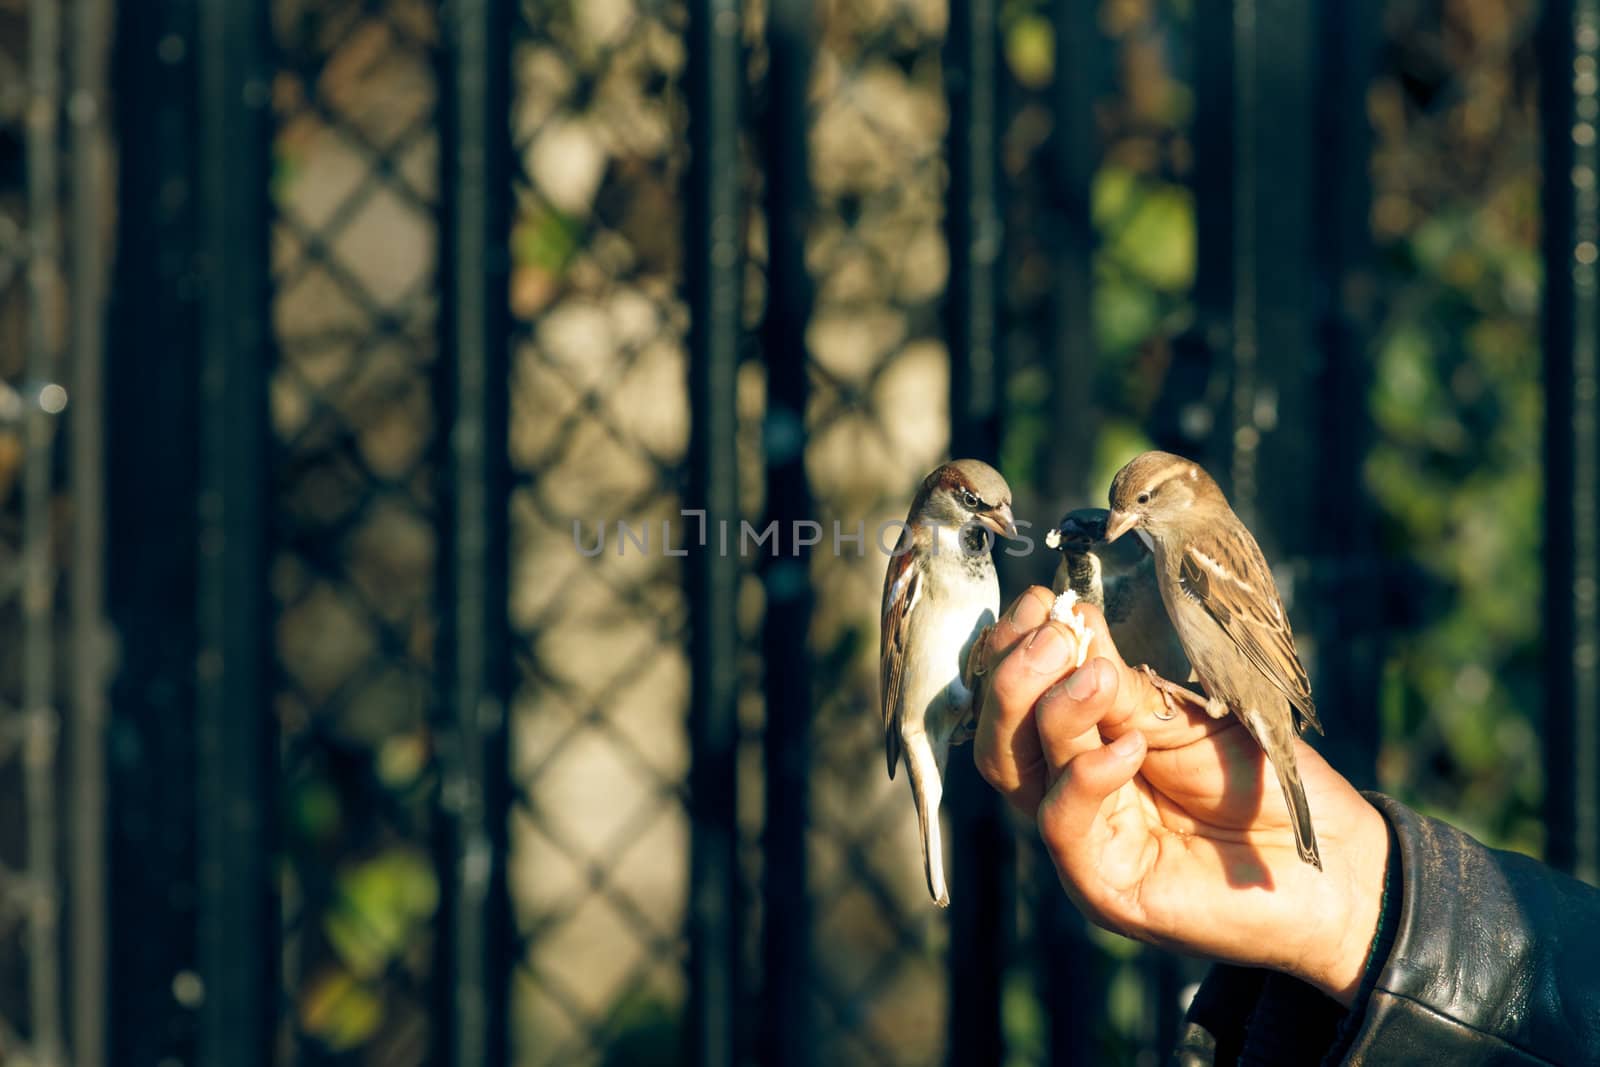 Sparrows standing on a human hand and eating, horizontal shot with copyspace